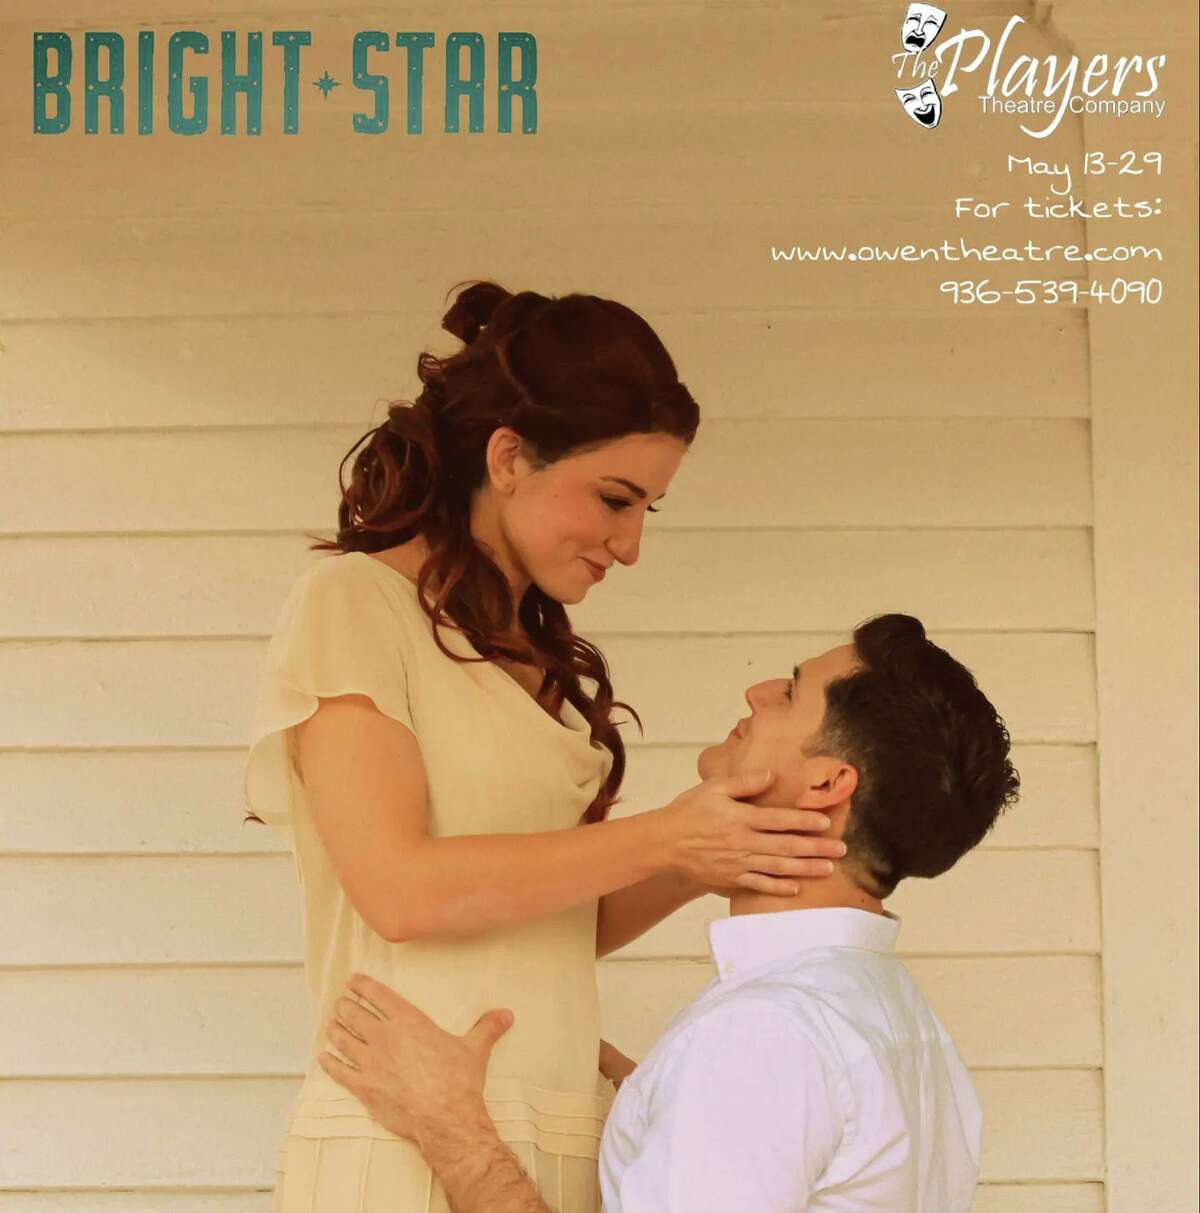 The Players Theatre Company stages Steve Martin and Edie Brickell’s musical “Bright Star” May 13-29 at the Owen Theatre.